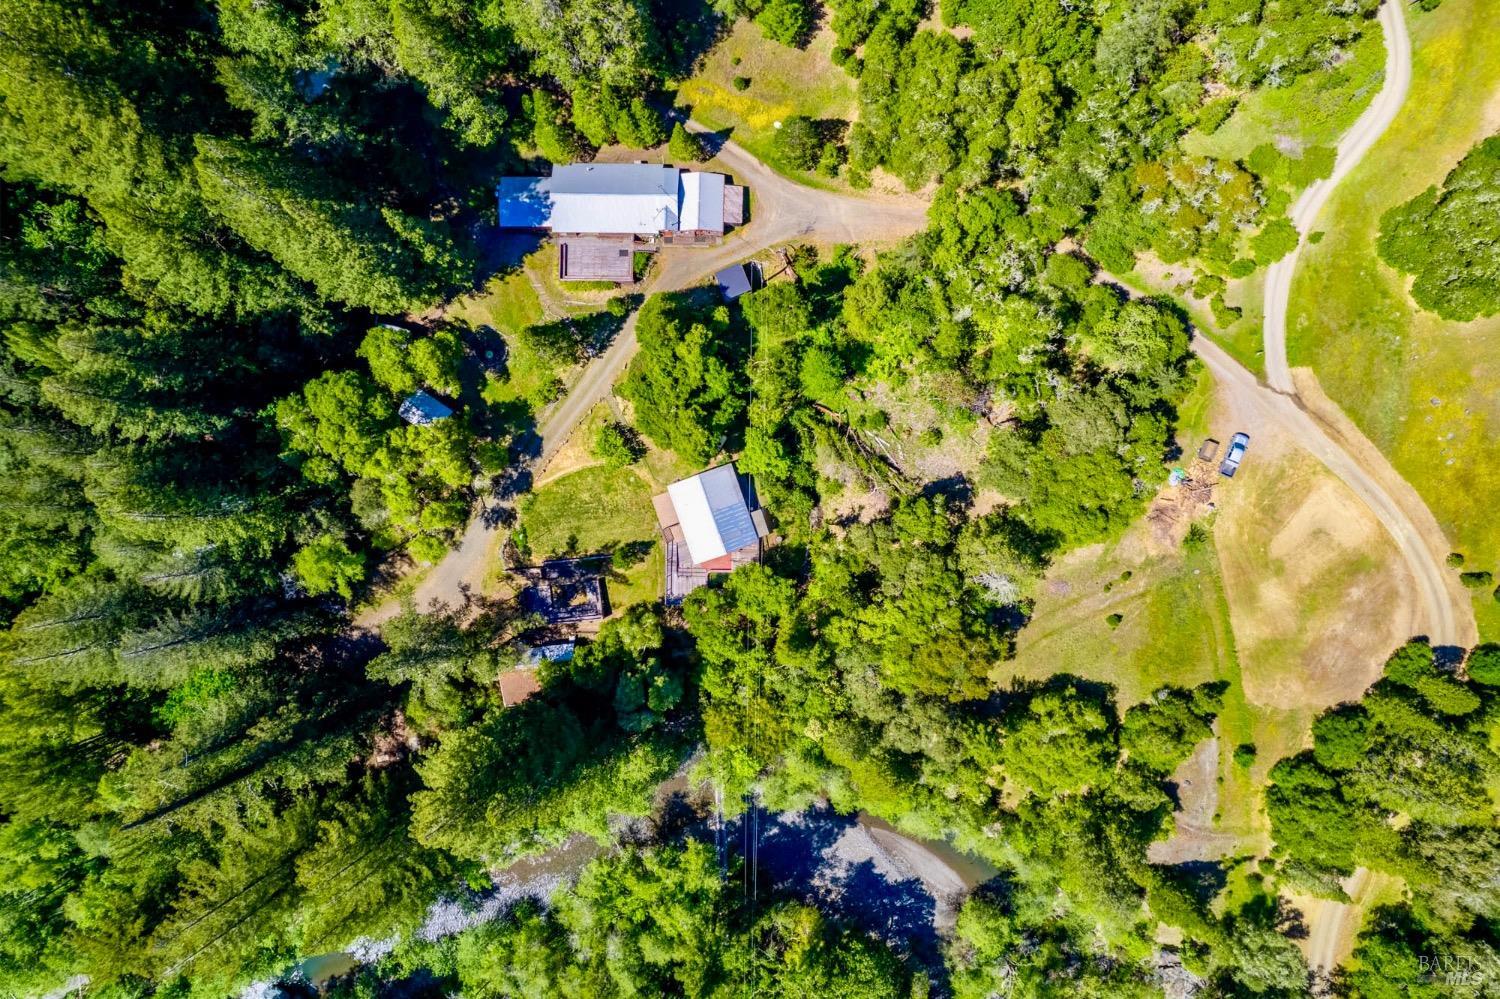 Birds Eye view of retreat center rimmed in redwood trees and open meadows with the river flowing below